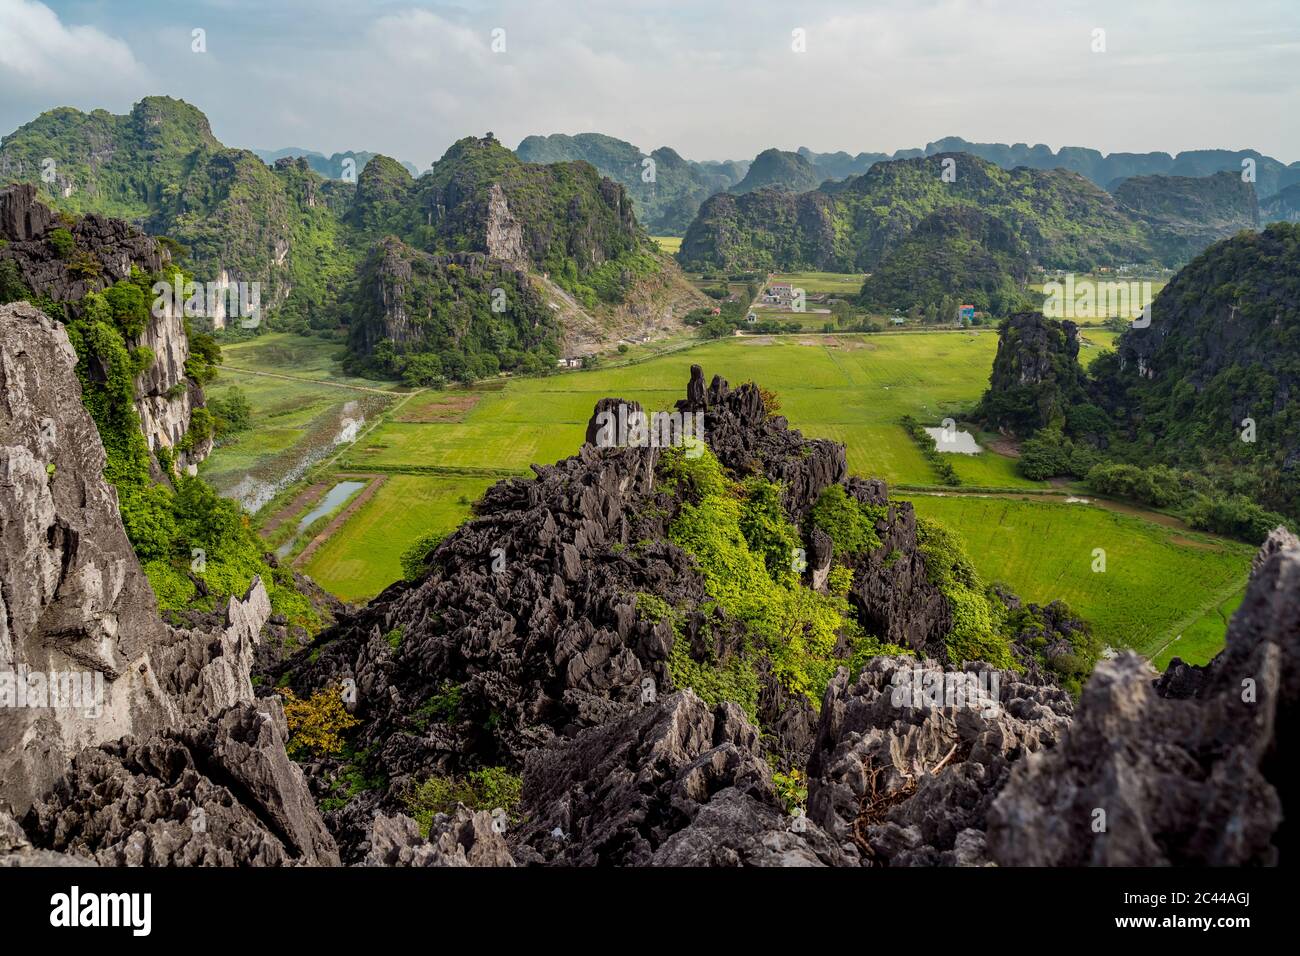 Vietnam, Ninh Binh Province, Ninh Binh, Scenic view of forested karst formations in Hong River Delta Stock Photo